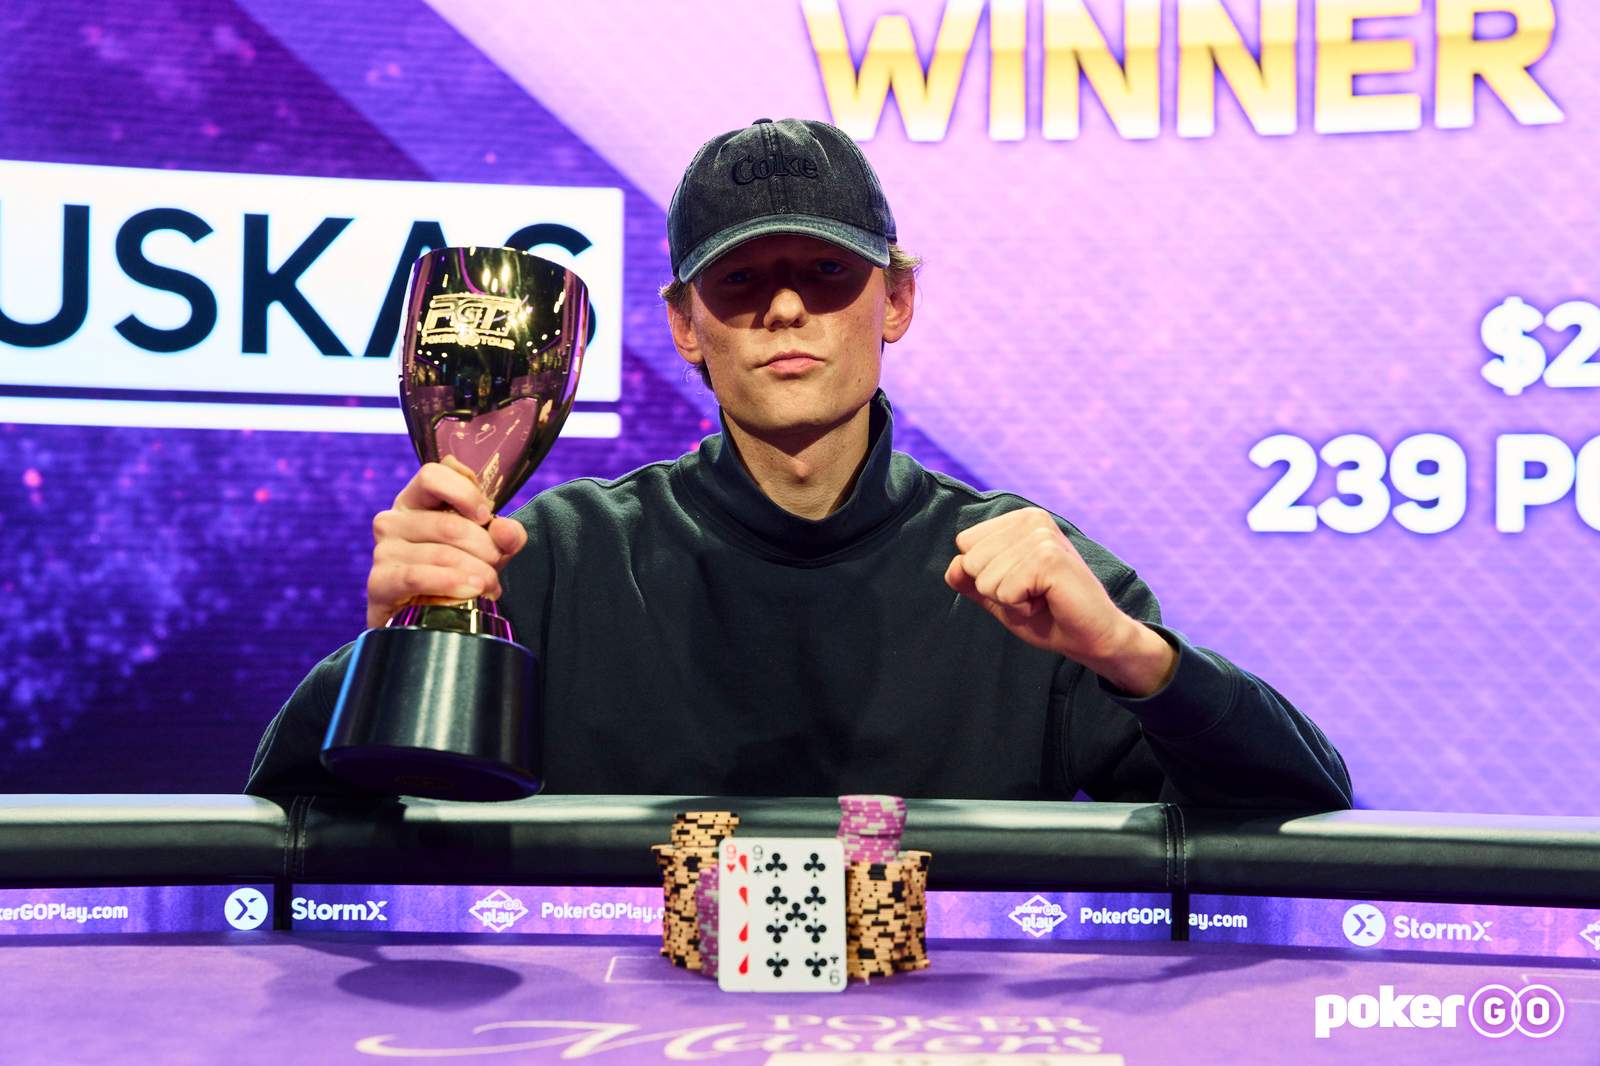 Vladas Tamasauskas Claims the Title and $239,600 First Place Prize in Event #1 $10,000 No-Limit Hold'em